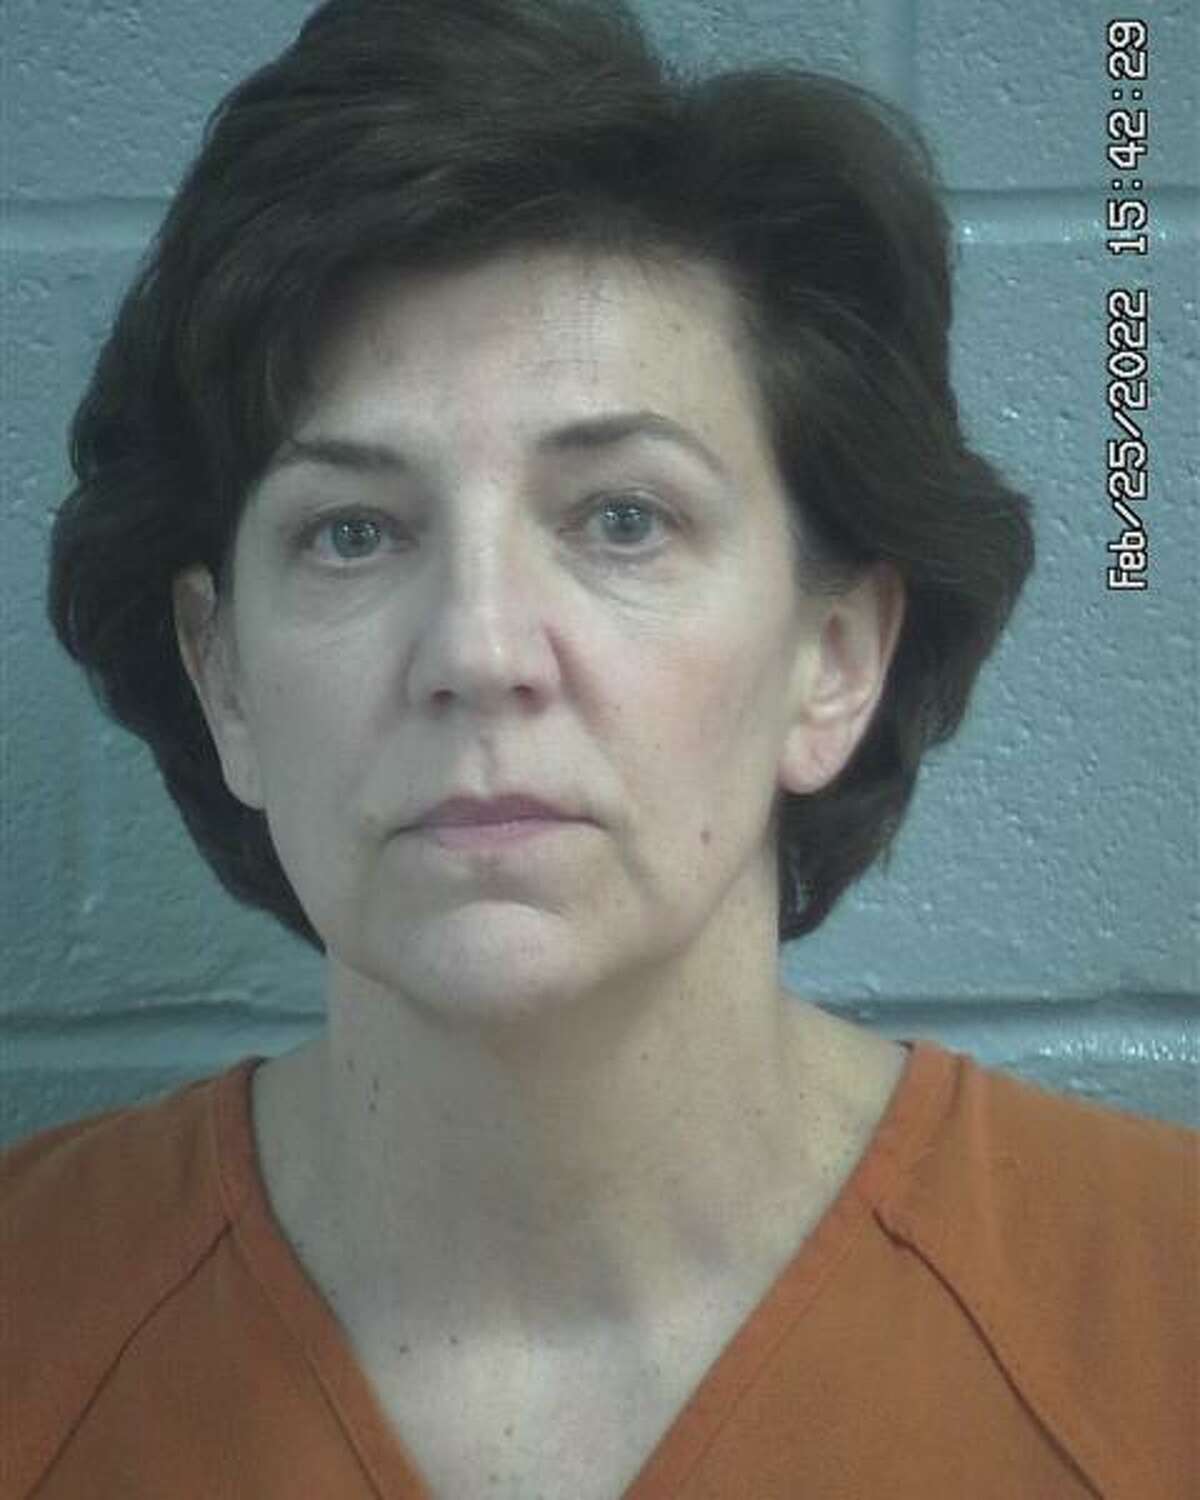 Adrianne Clifton, Trinity School's assistant head for Administration/Director of Admission, was arrested Friday morning for failure to report with intent to conceal neglect or abuse.